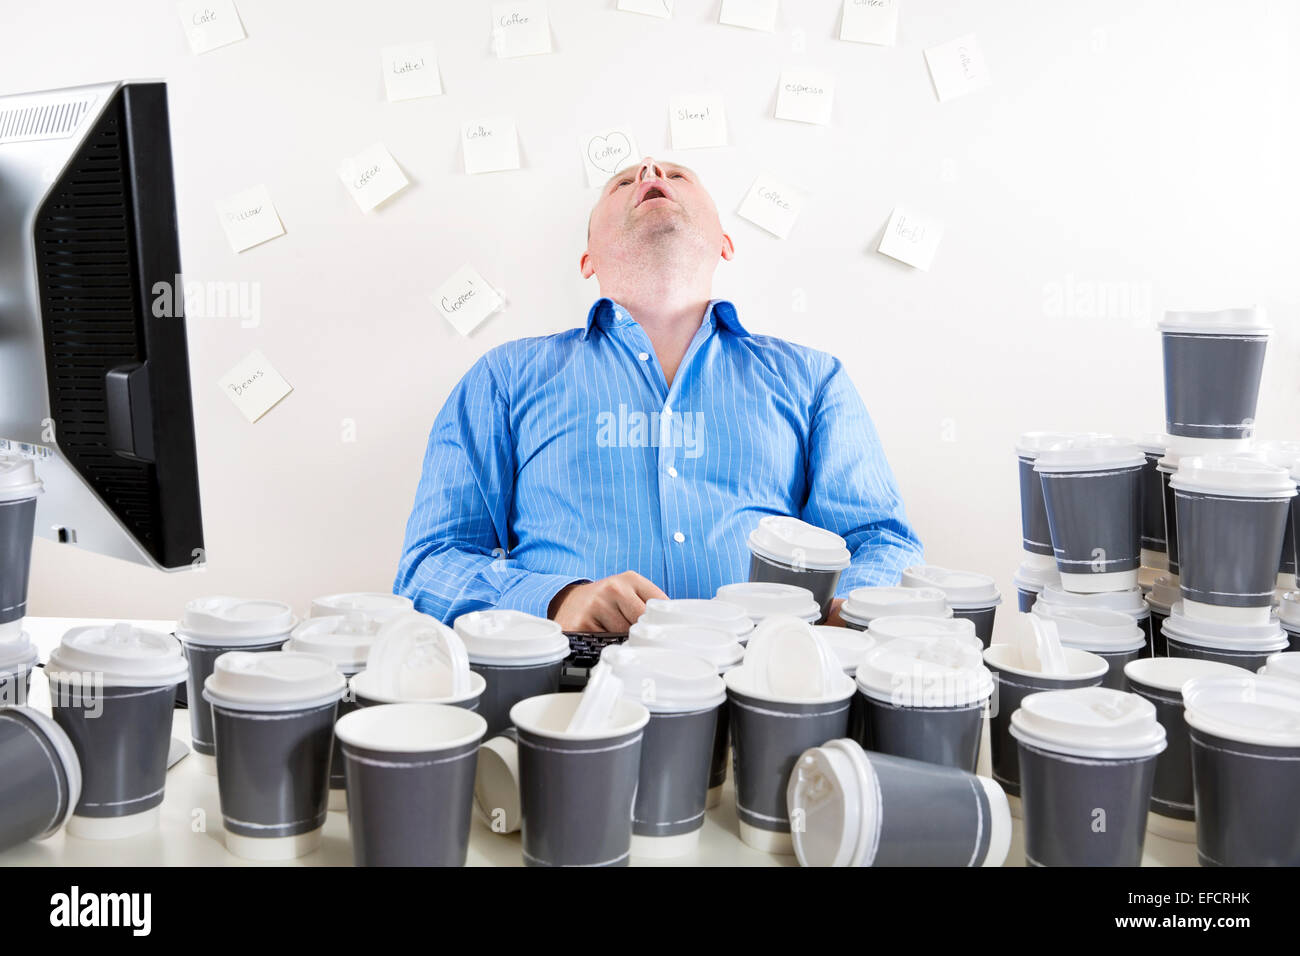 Overworked and exhausted office worker Stock Photo